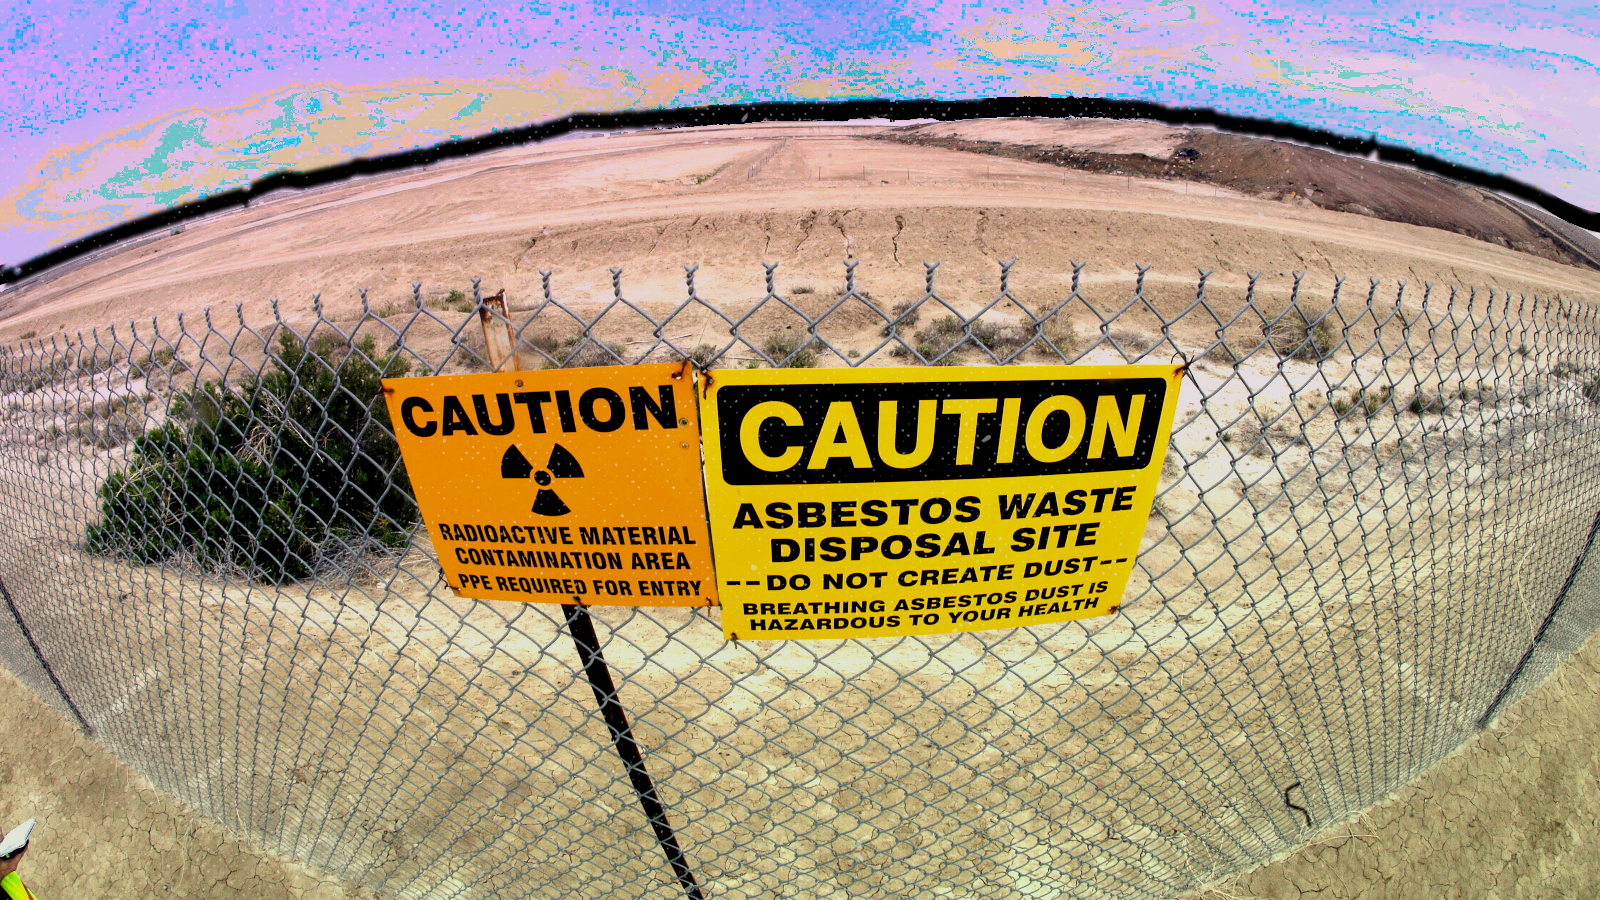 A caution sign hanging on a wire fence reads “asbestos waste disposal site.”